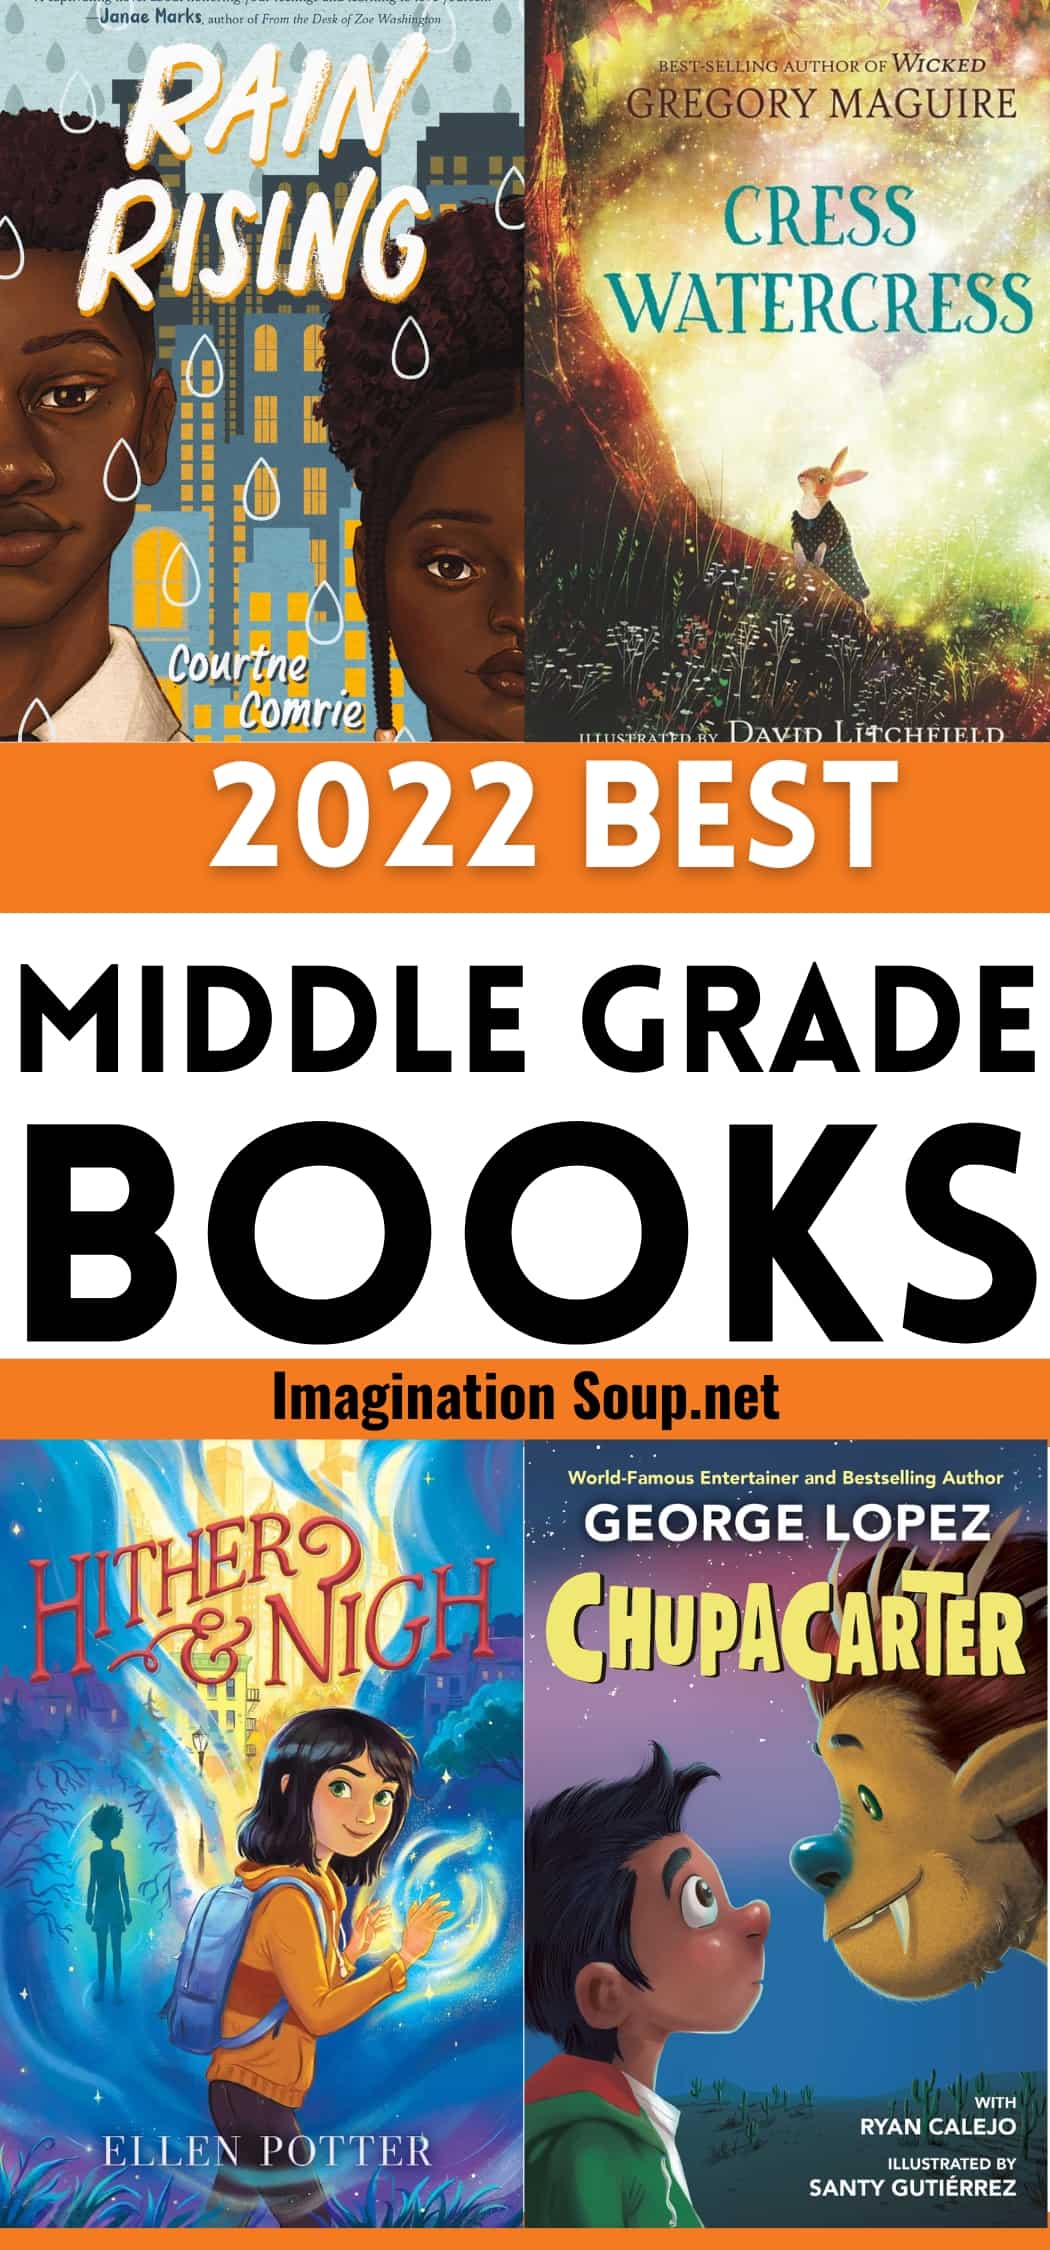 2022 Best MIDDLE GRADE Books